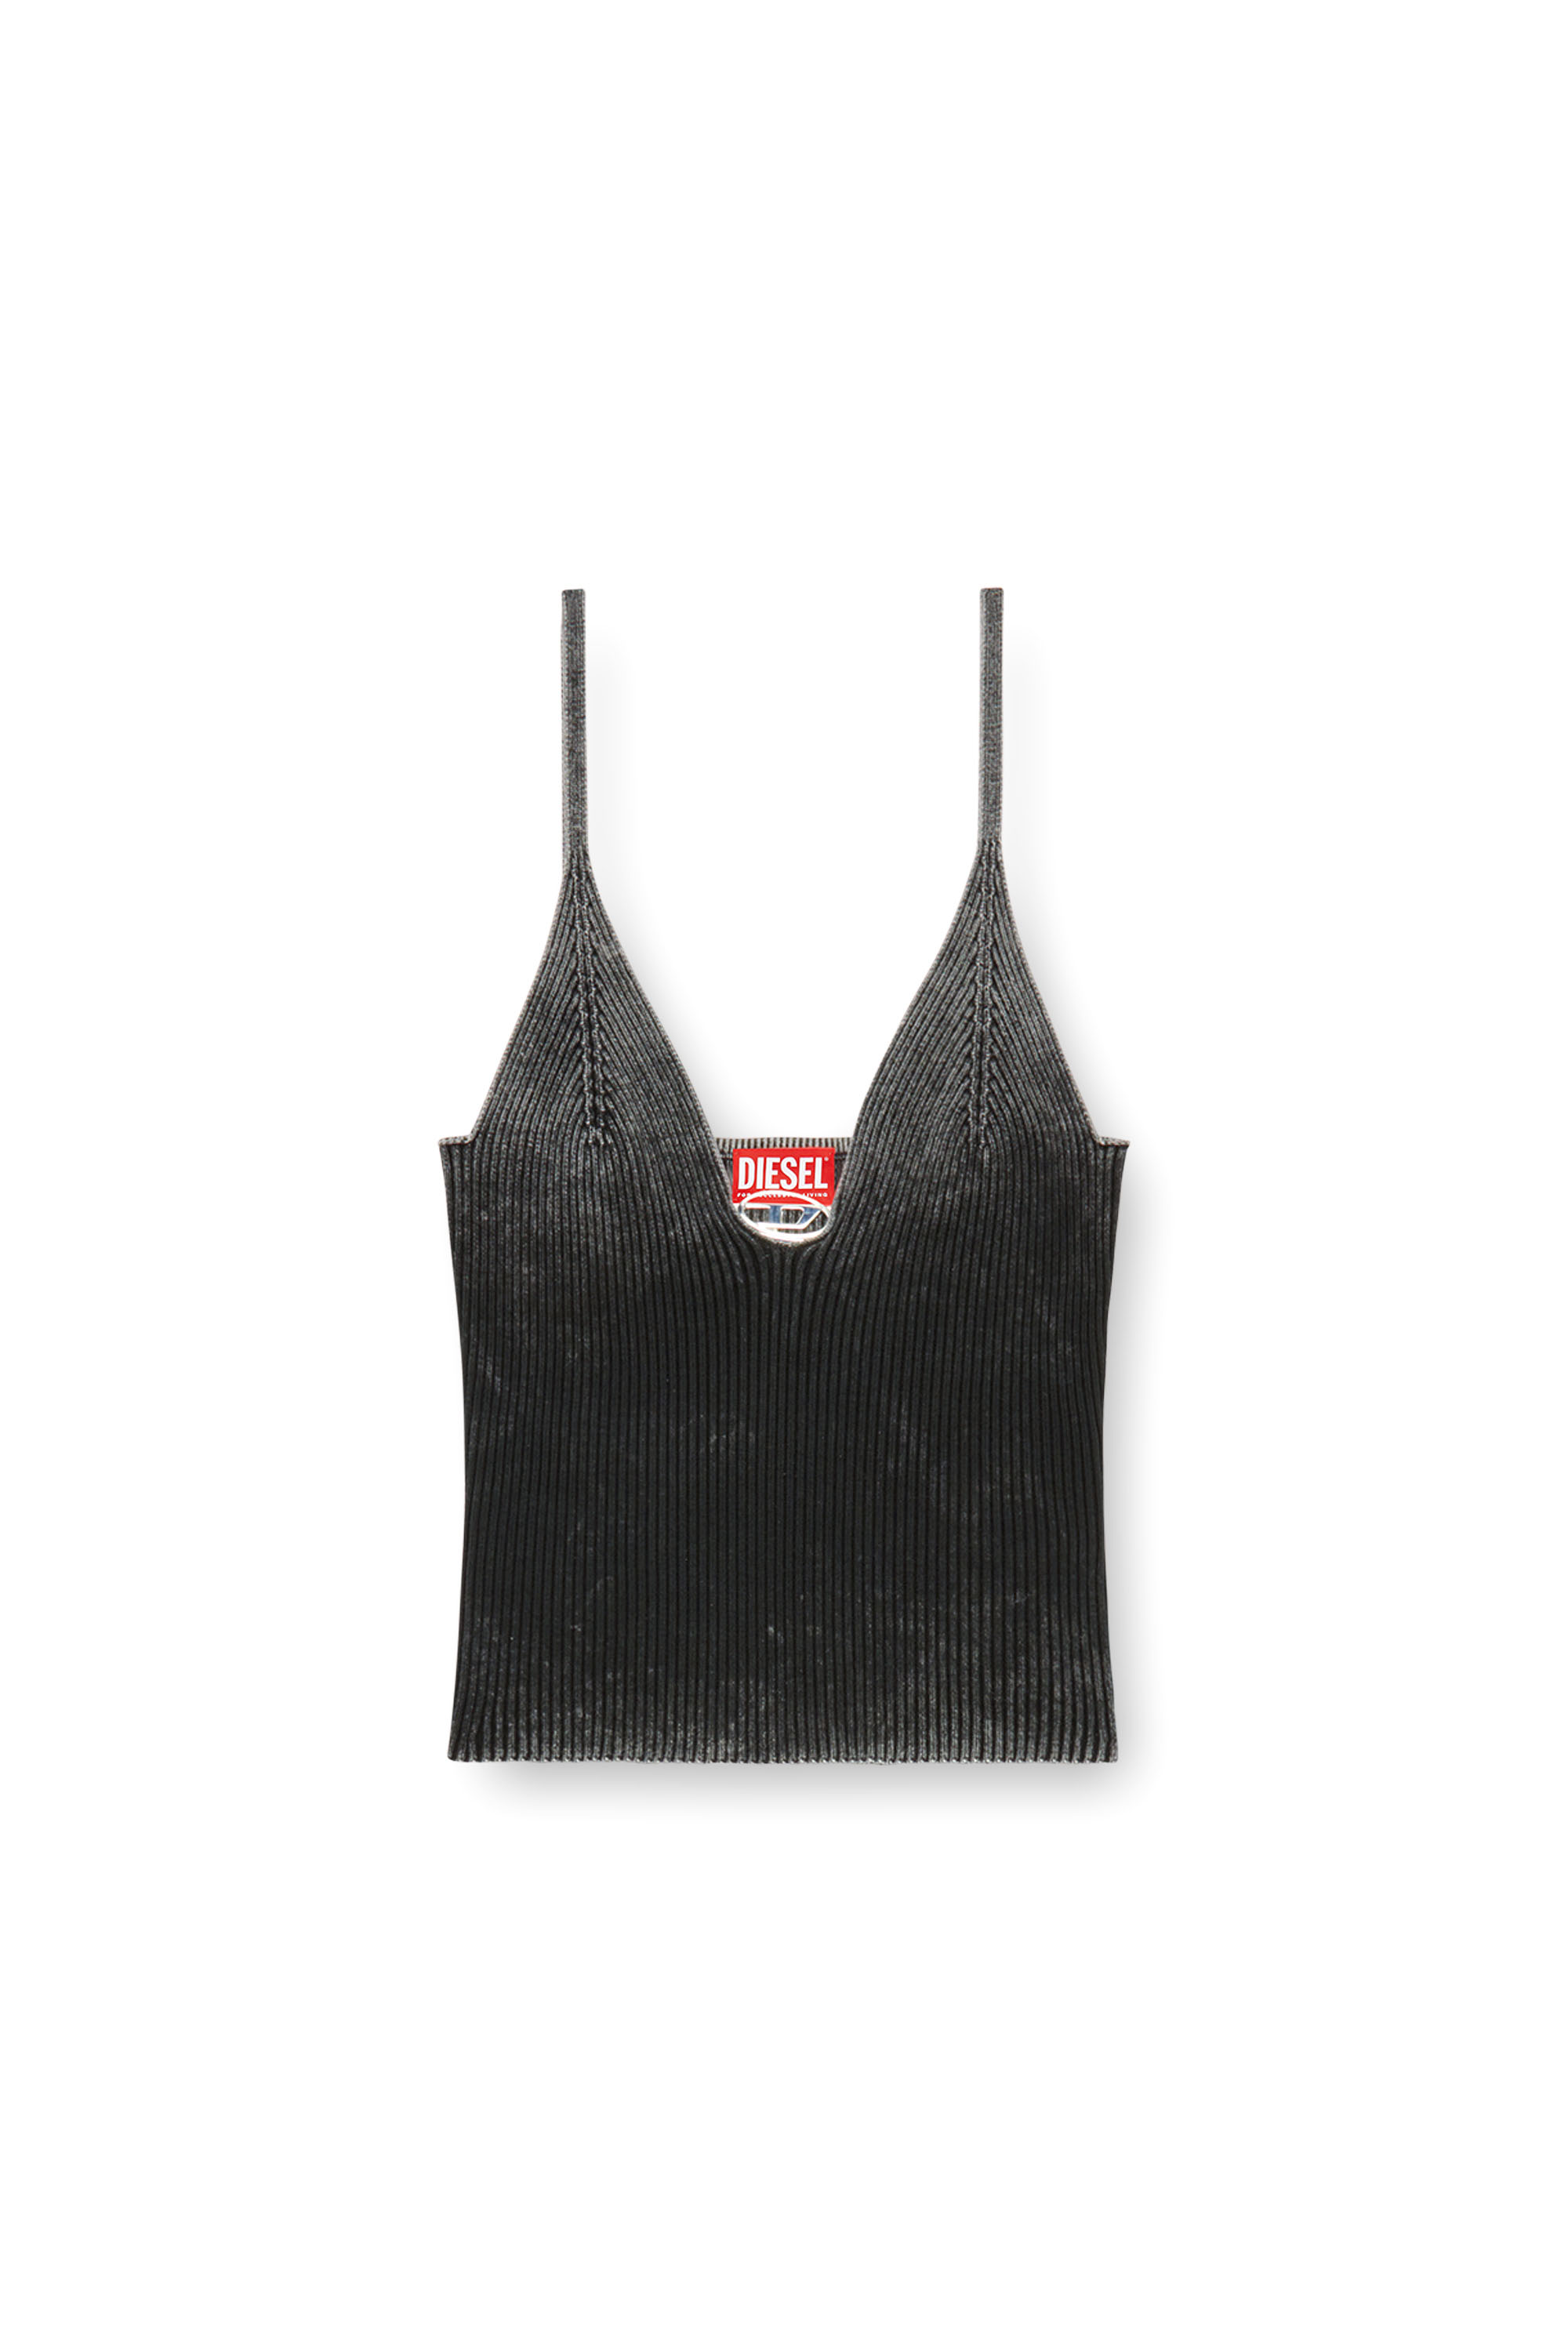 Diesel - M-LAILA, Female Camisole in faded ribbed knit in ブラック - Image 3